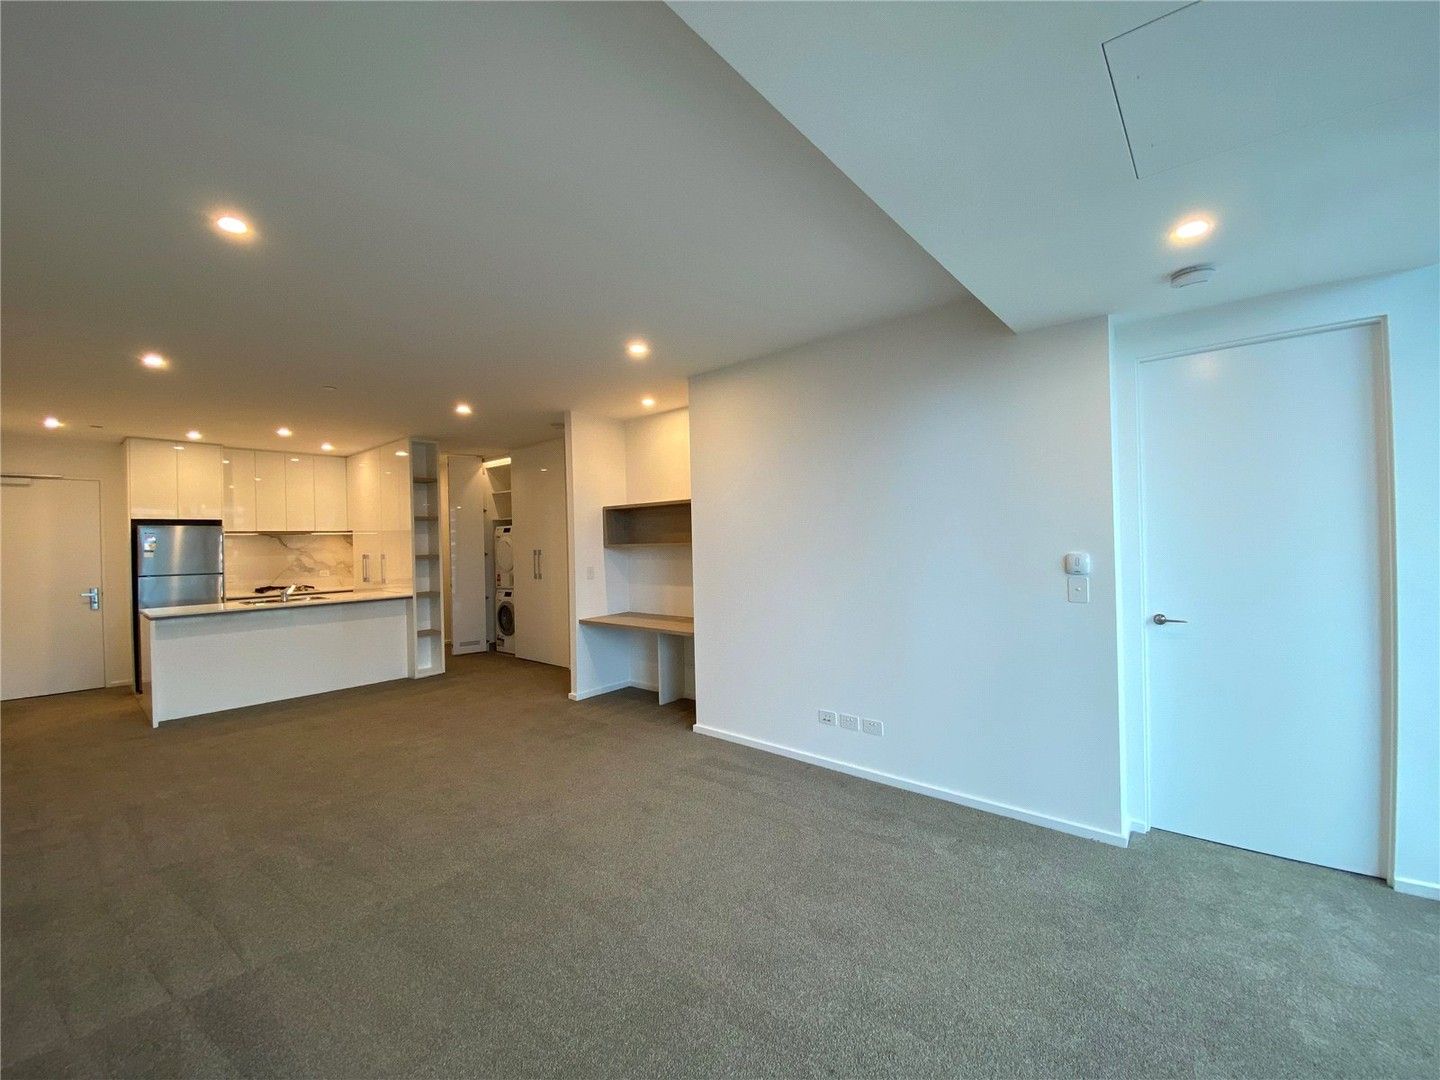 3 bedrooms Apartment / Unit / Flat in 2608/560 Lonsdale Street MELBOURNE VIC, 3000